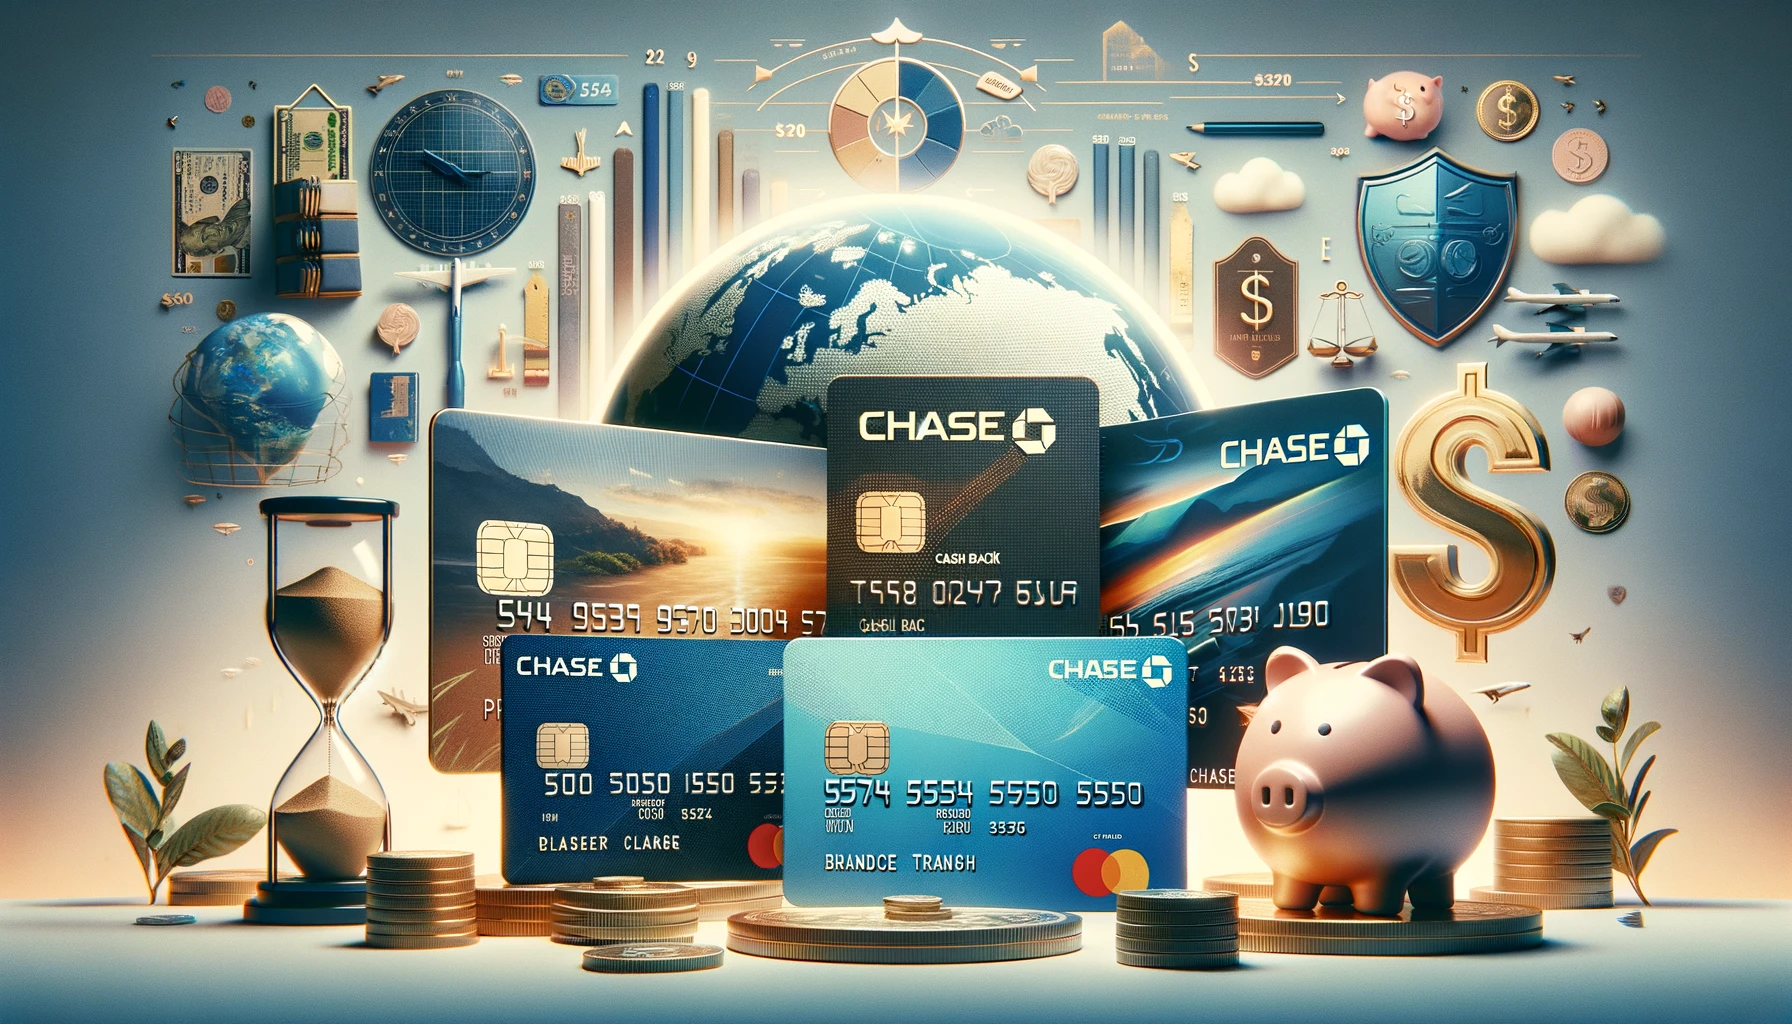 Chase Credit Card – Official Login At CreditCard.Chase.com